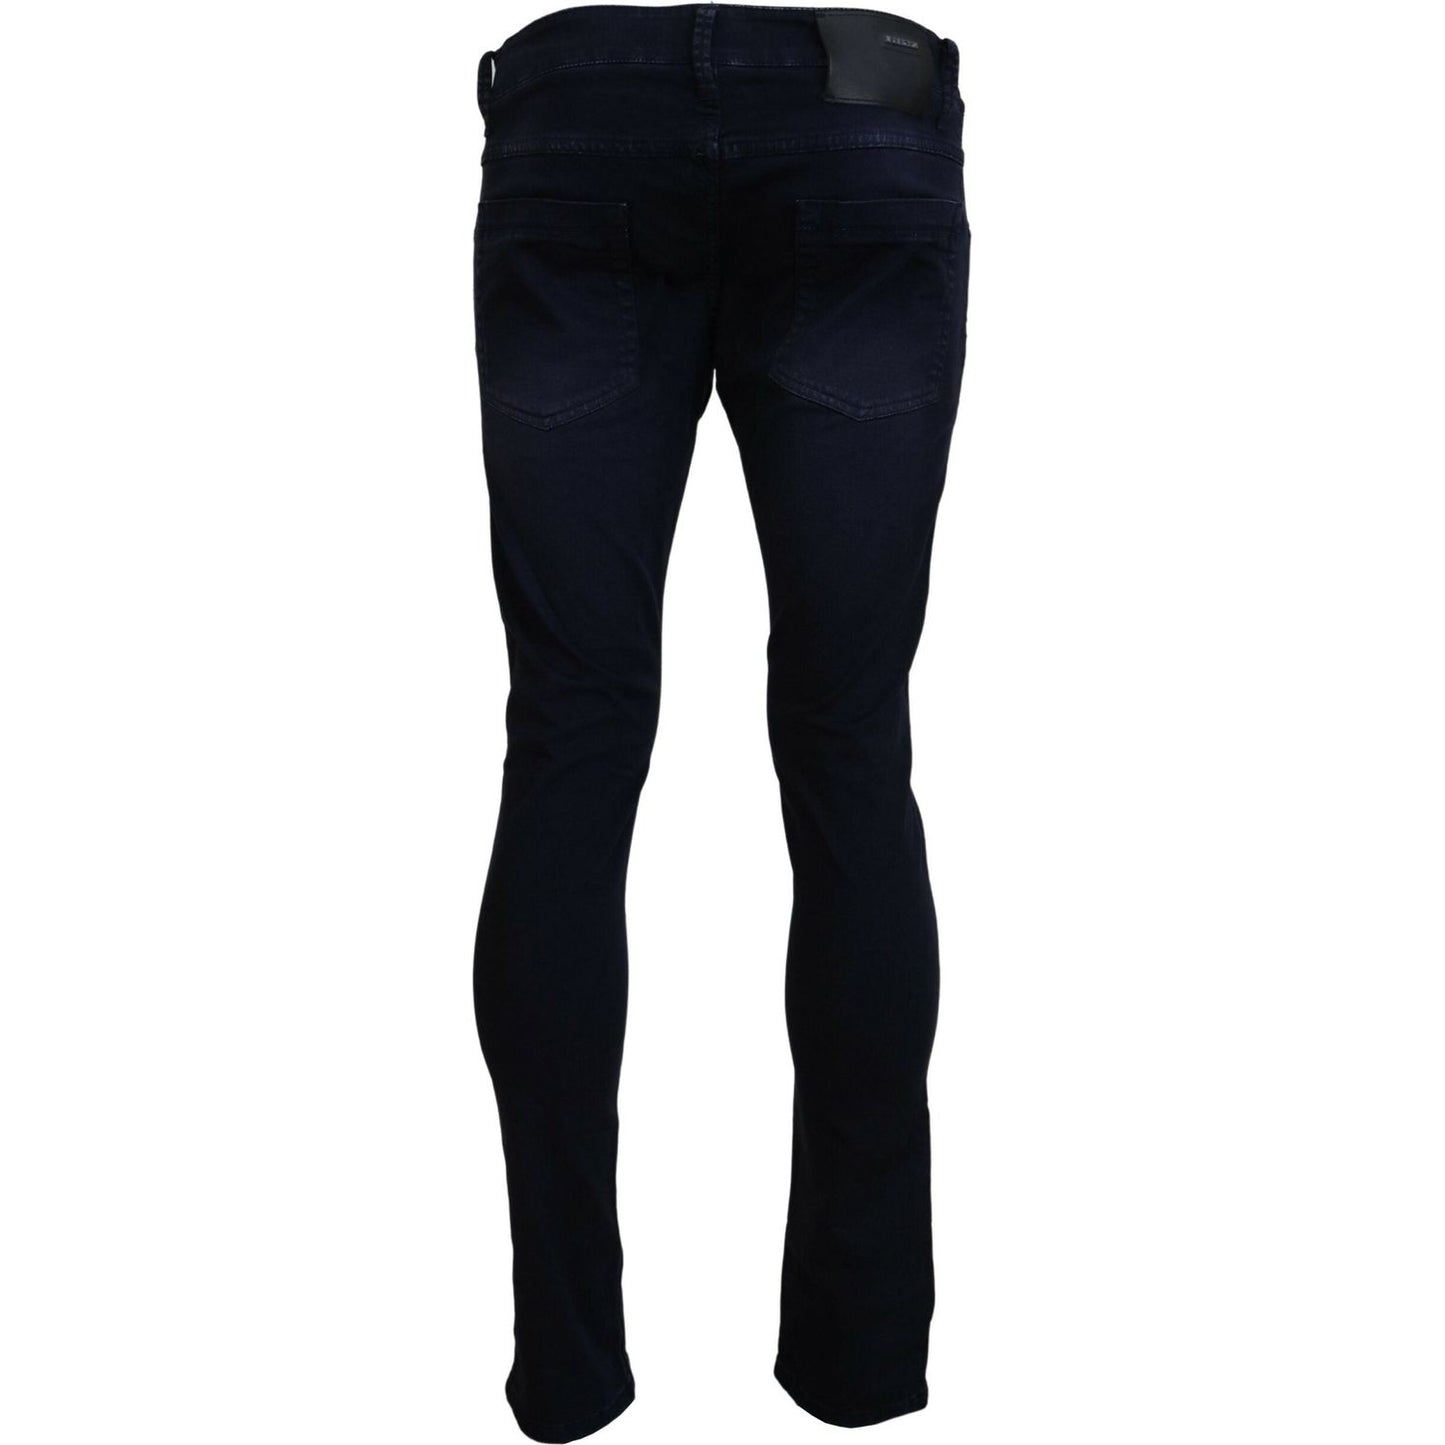 Acht Sophisticated Tapered Denim Jeans blue-cotton-tapered-slim-fit-men-casual-denim-jeans